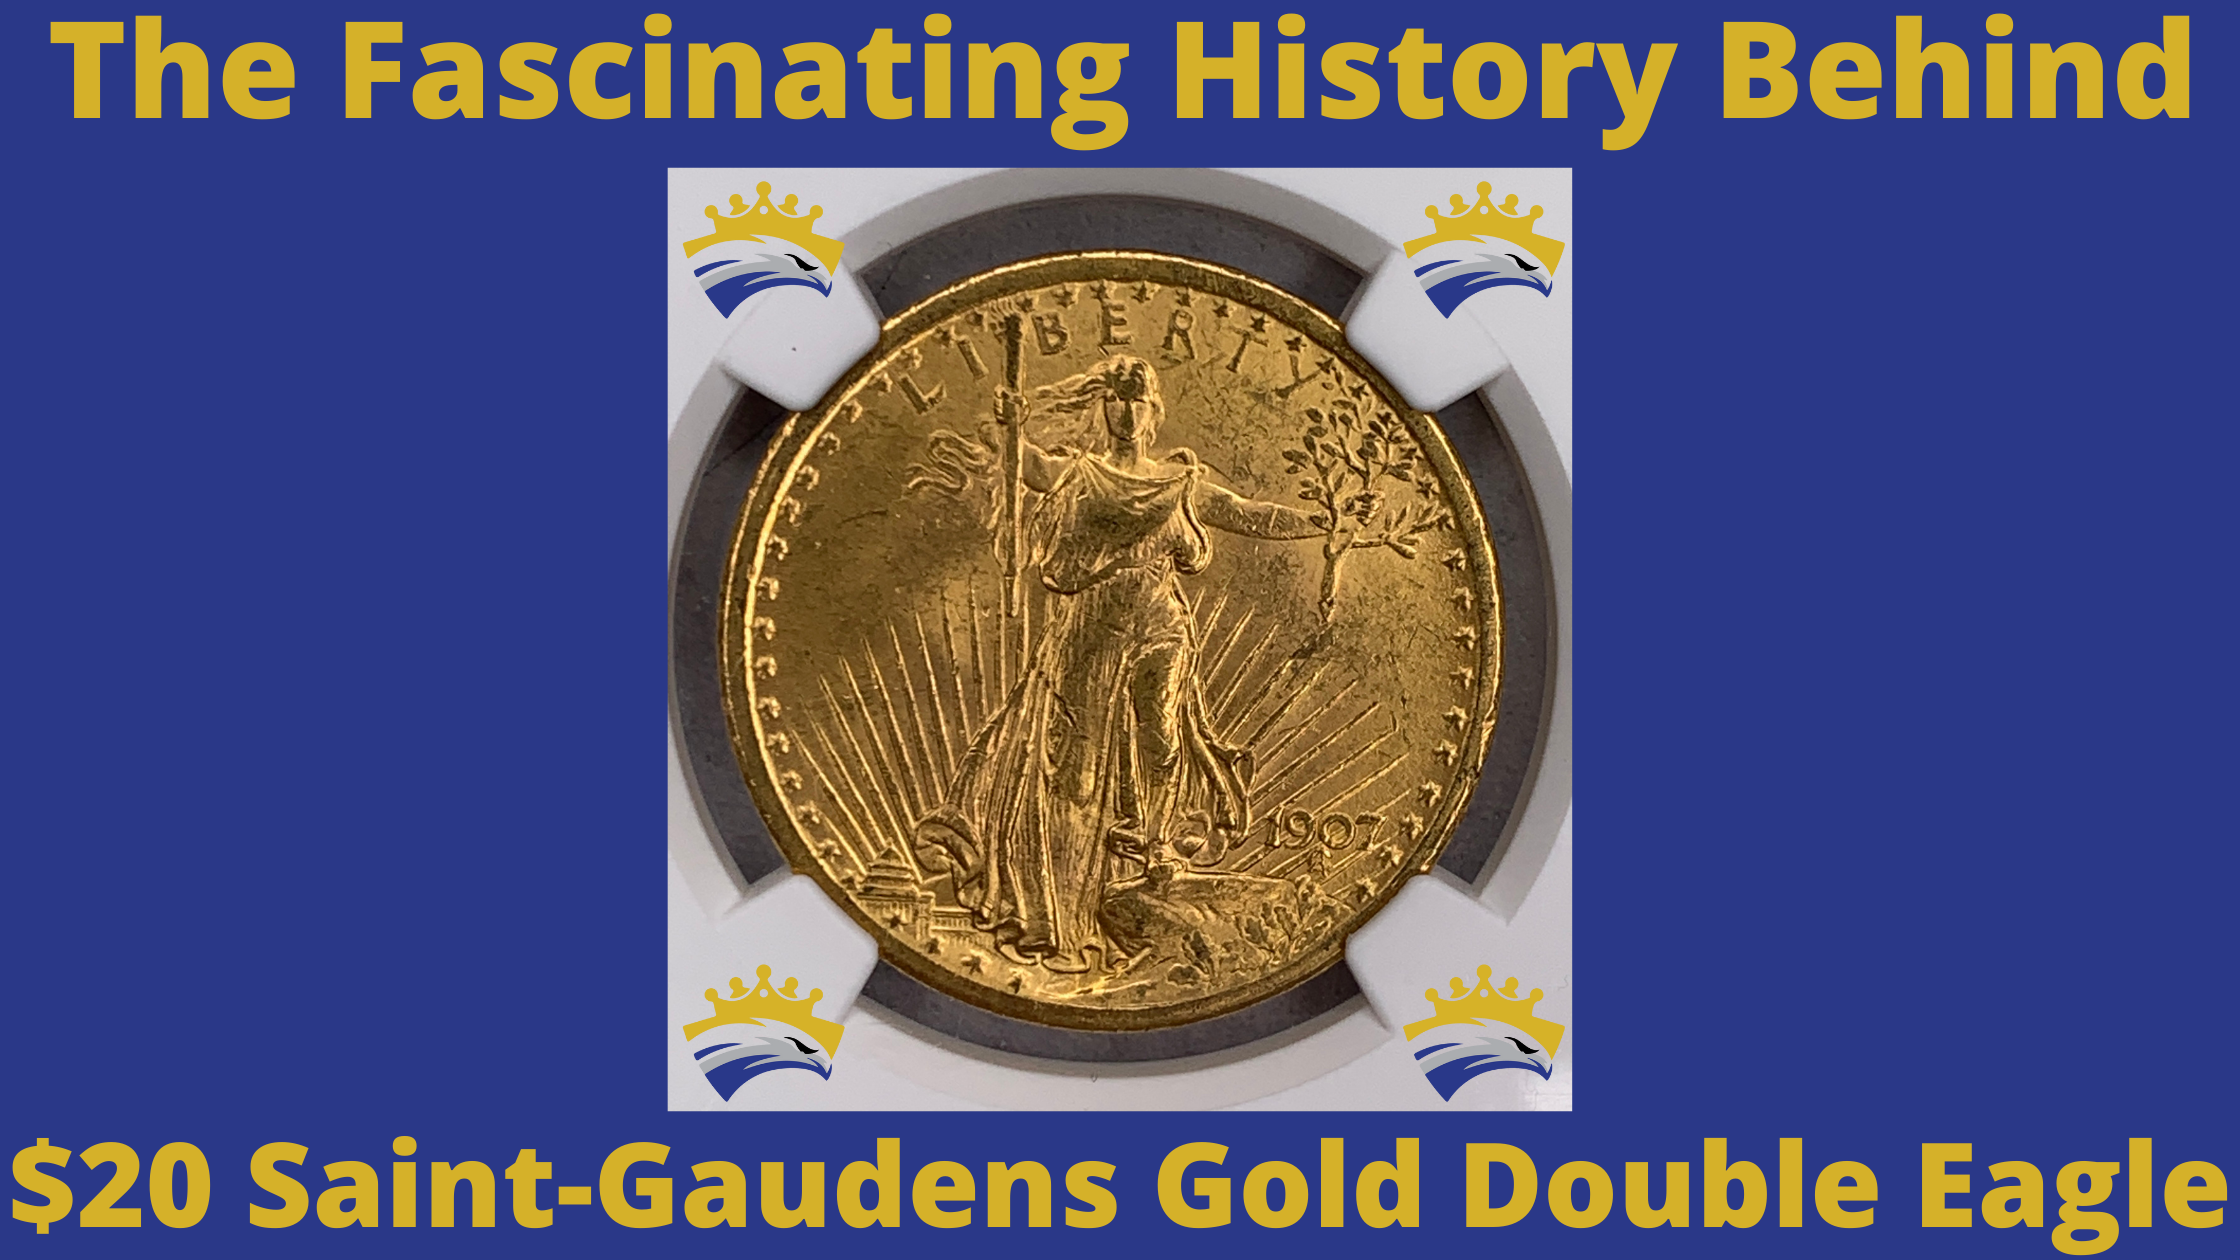 The Fascinating History Behind the $20 Saint-Gaudens Gold Double Eagle